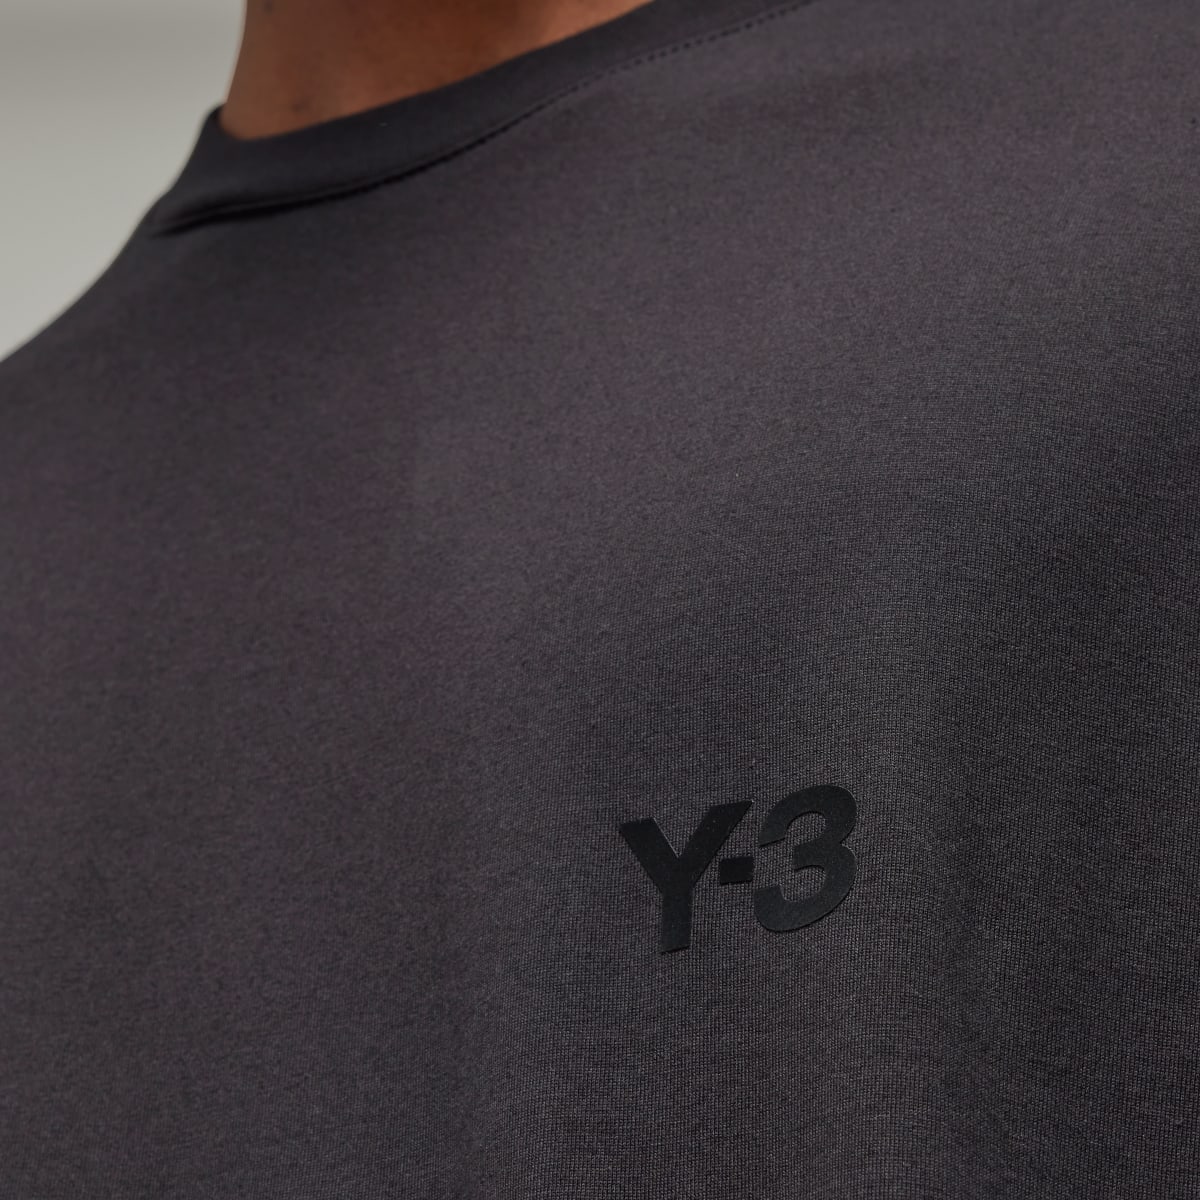 Adidas Y-3 Relaxed Short Sleeve T-Shirt. 4